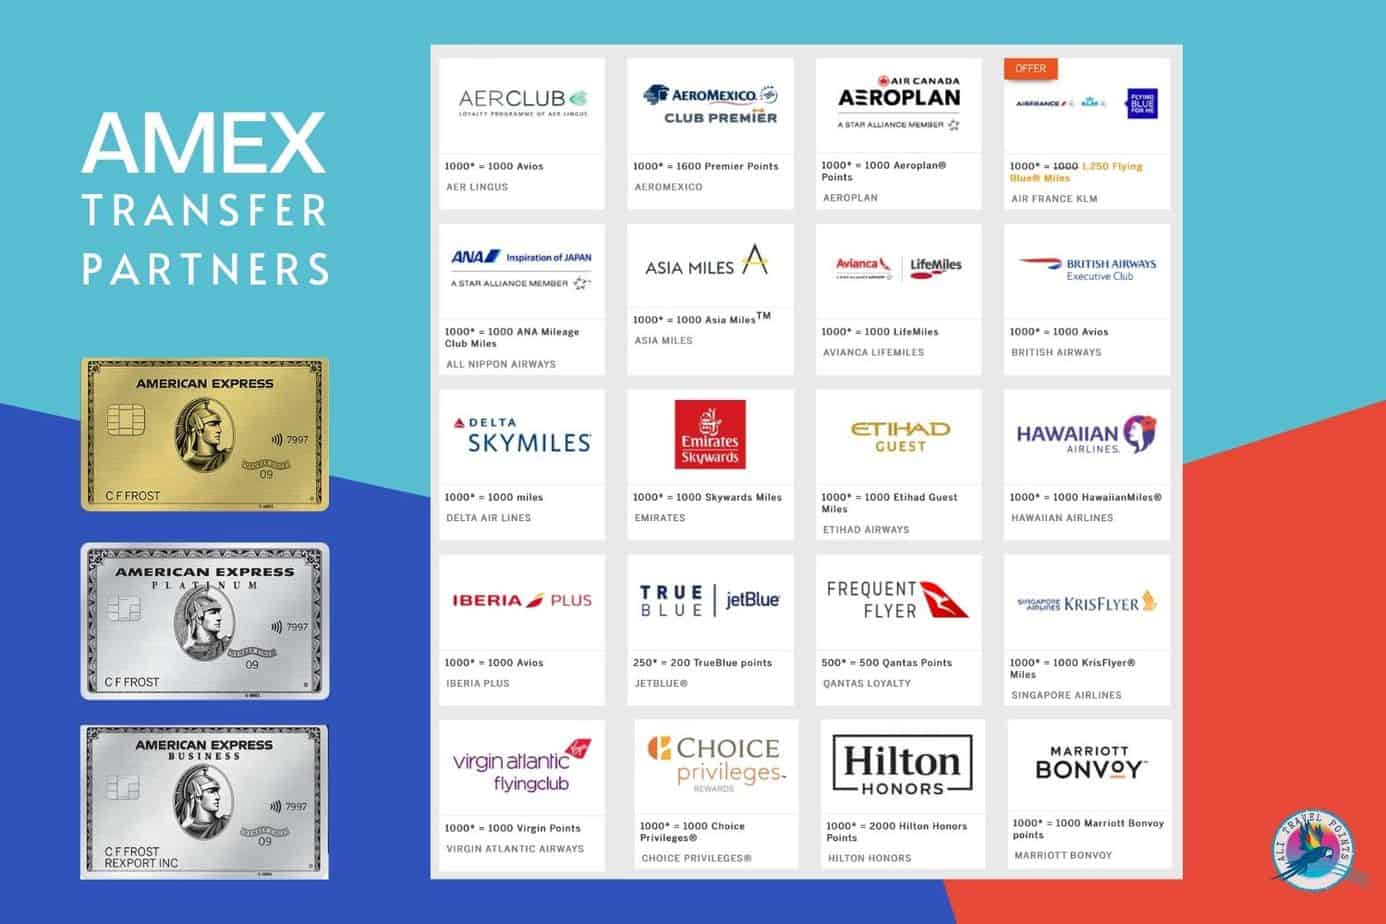 travel partners of amex